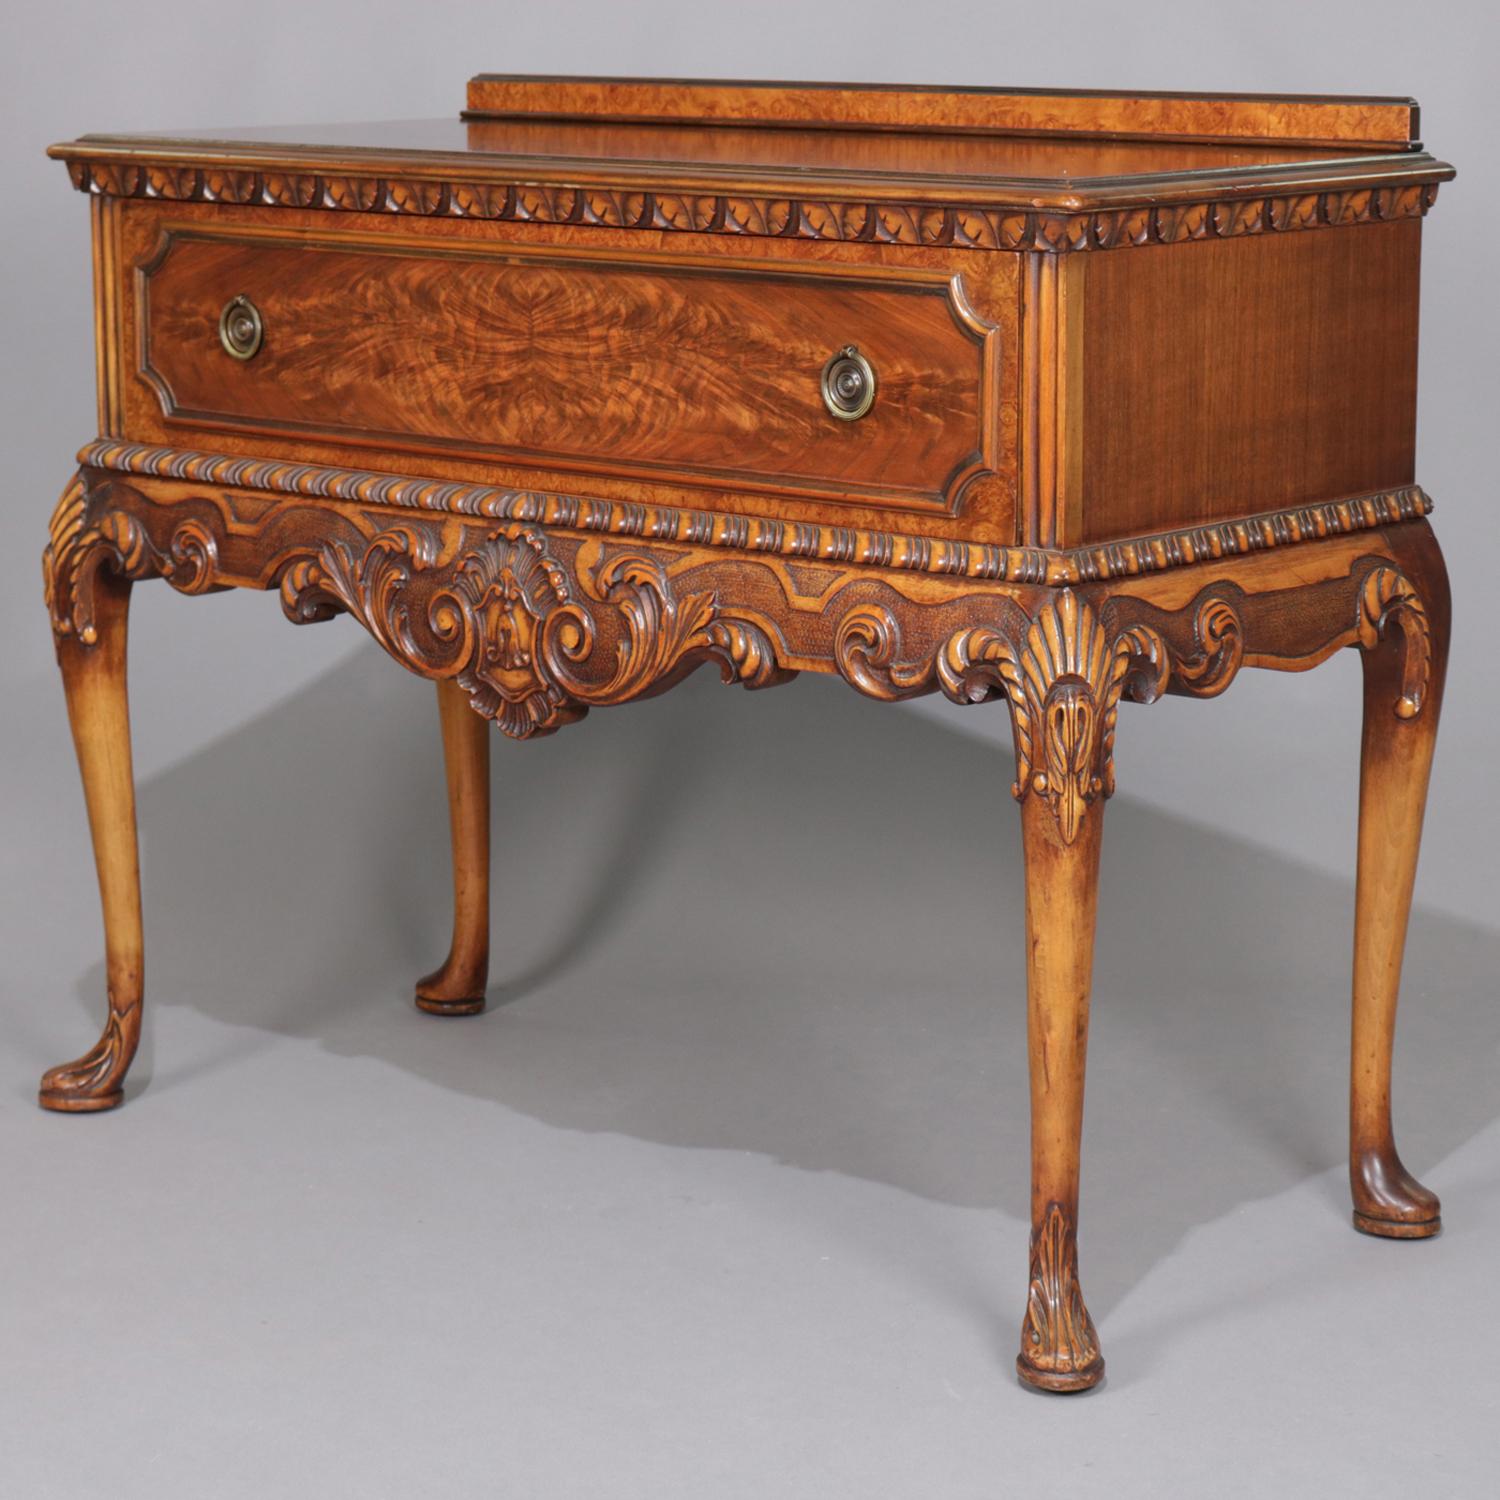 Antique Berkey & Gay Queen Anne style server features flame mahogany case with low backsplash and carved foliate trimming, bookmatched long drawer, and seated on cabriole legs with carved knees, Berkey & Gay label inside drawer, 19th